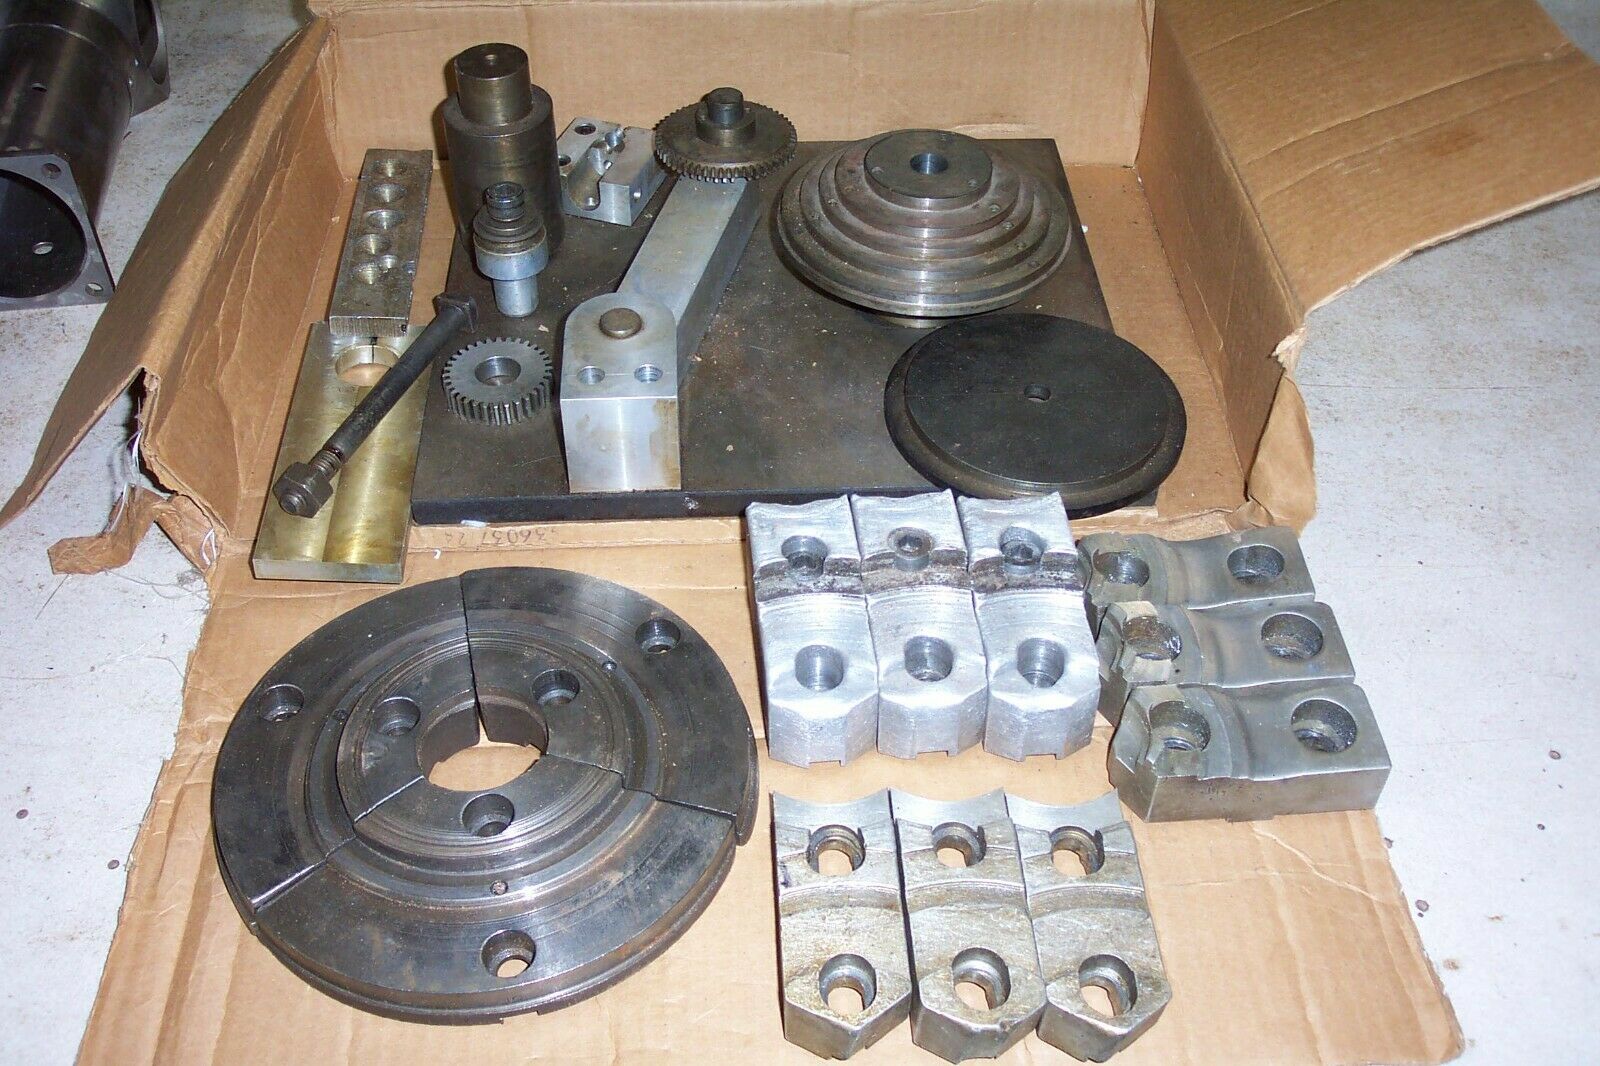 Heavy Duty Gear Lapping Fixture & Gear Run Out Fixture & Other Lathe Parts